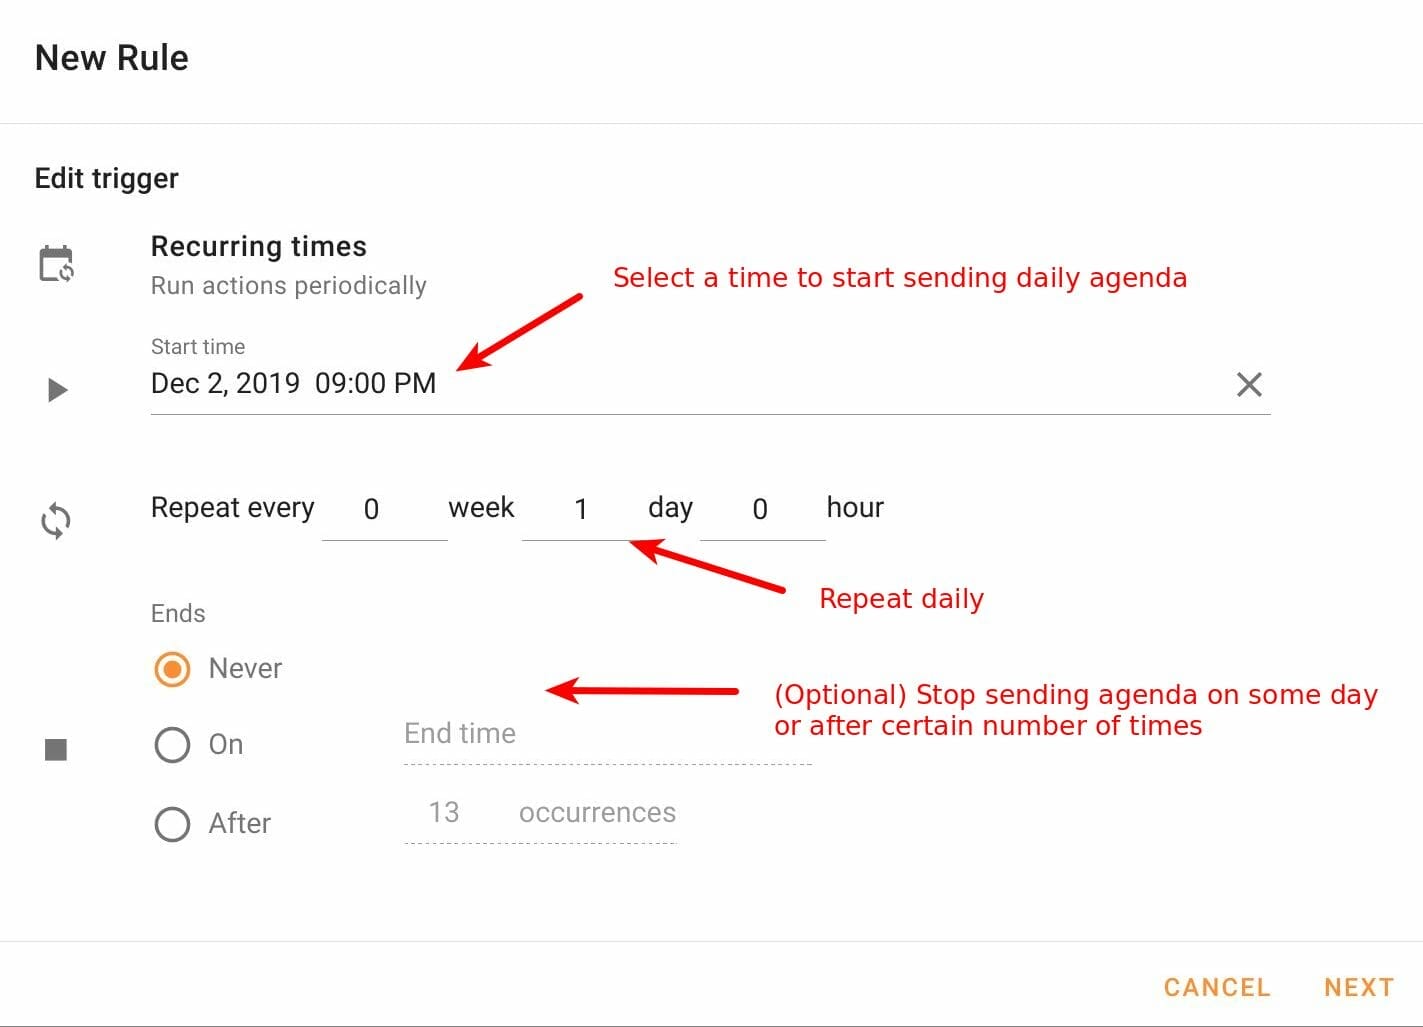 Configure recurring times for daily agenda in Foresight